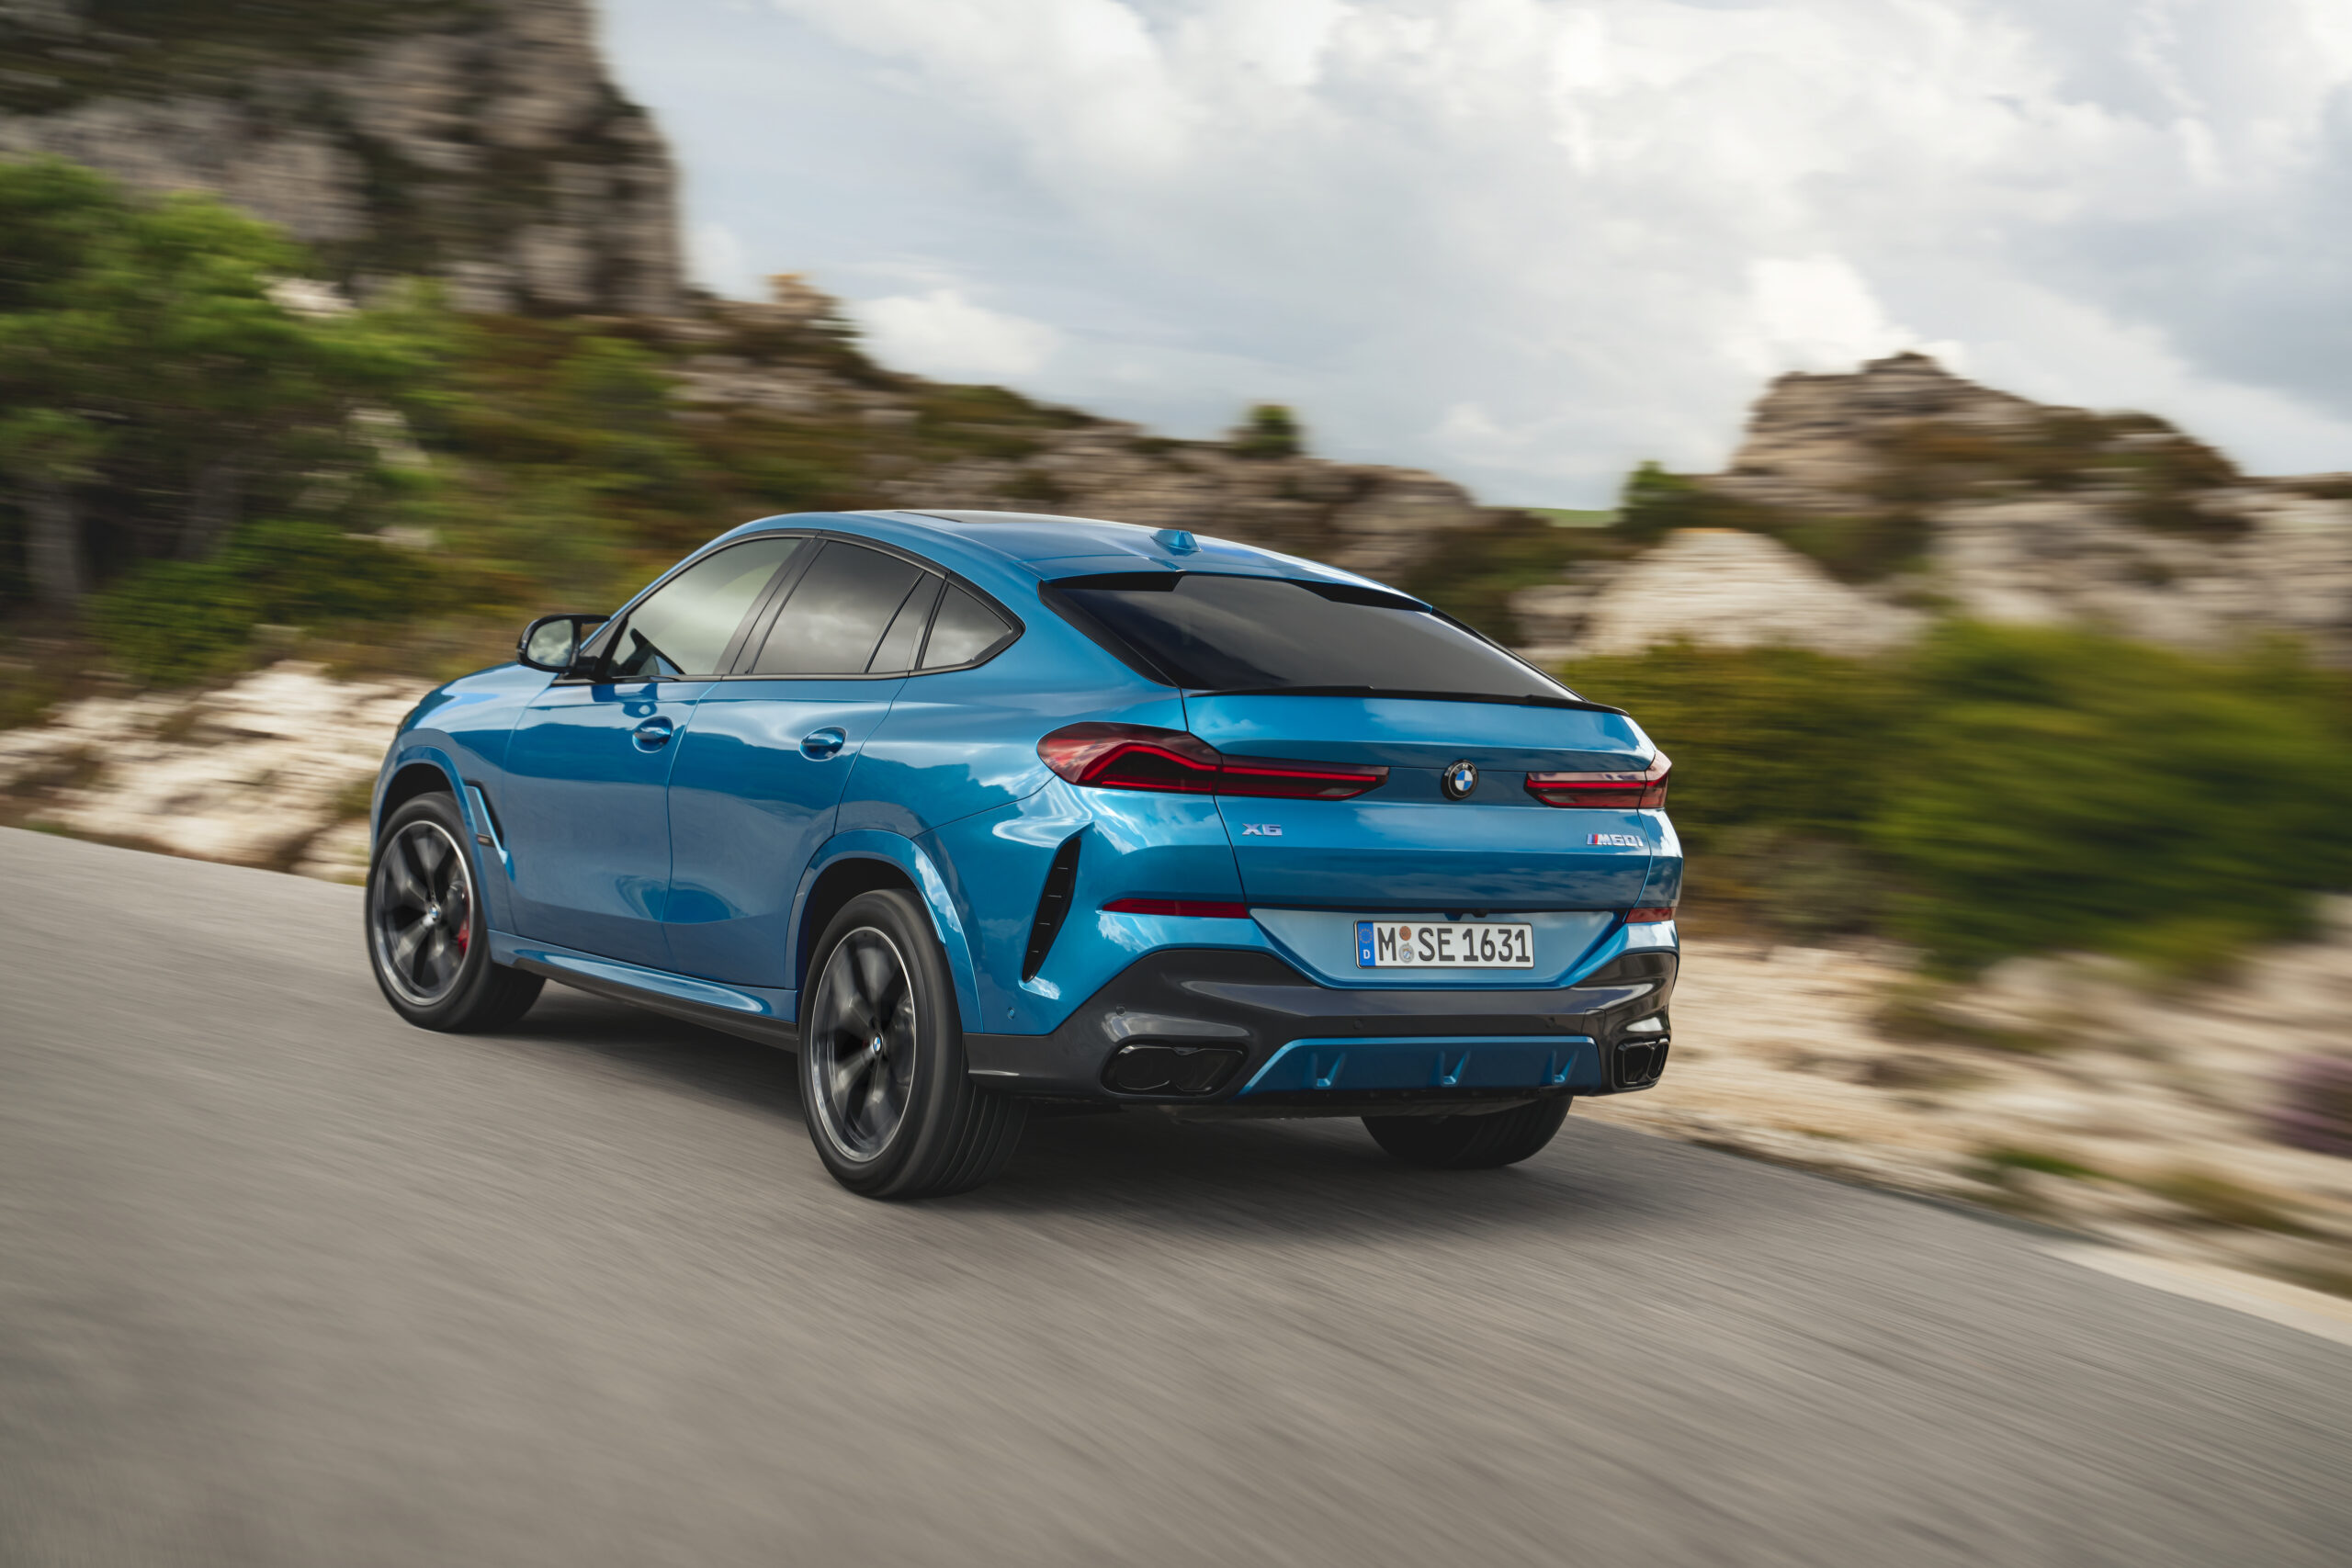 P90492378 highRes the new bmw x6 m60i scaled